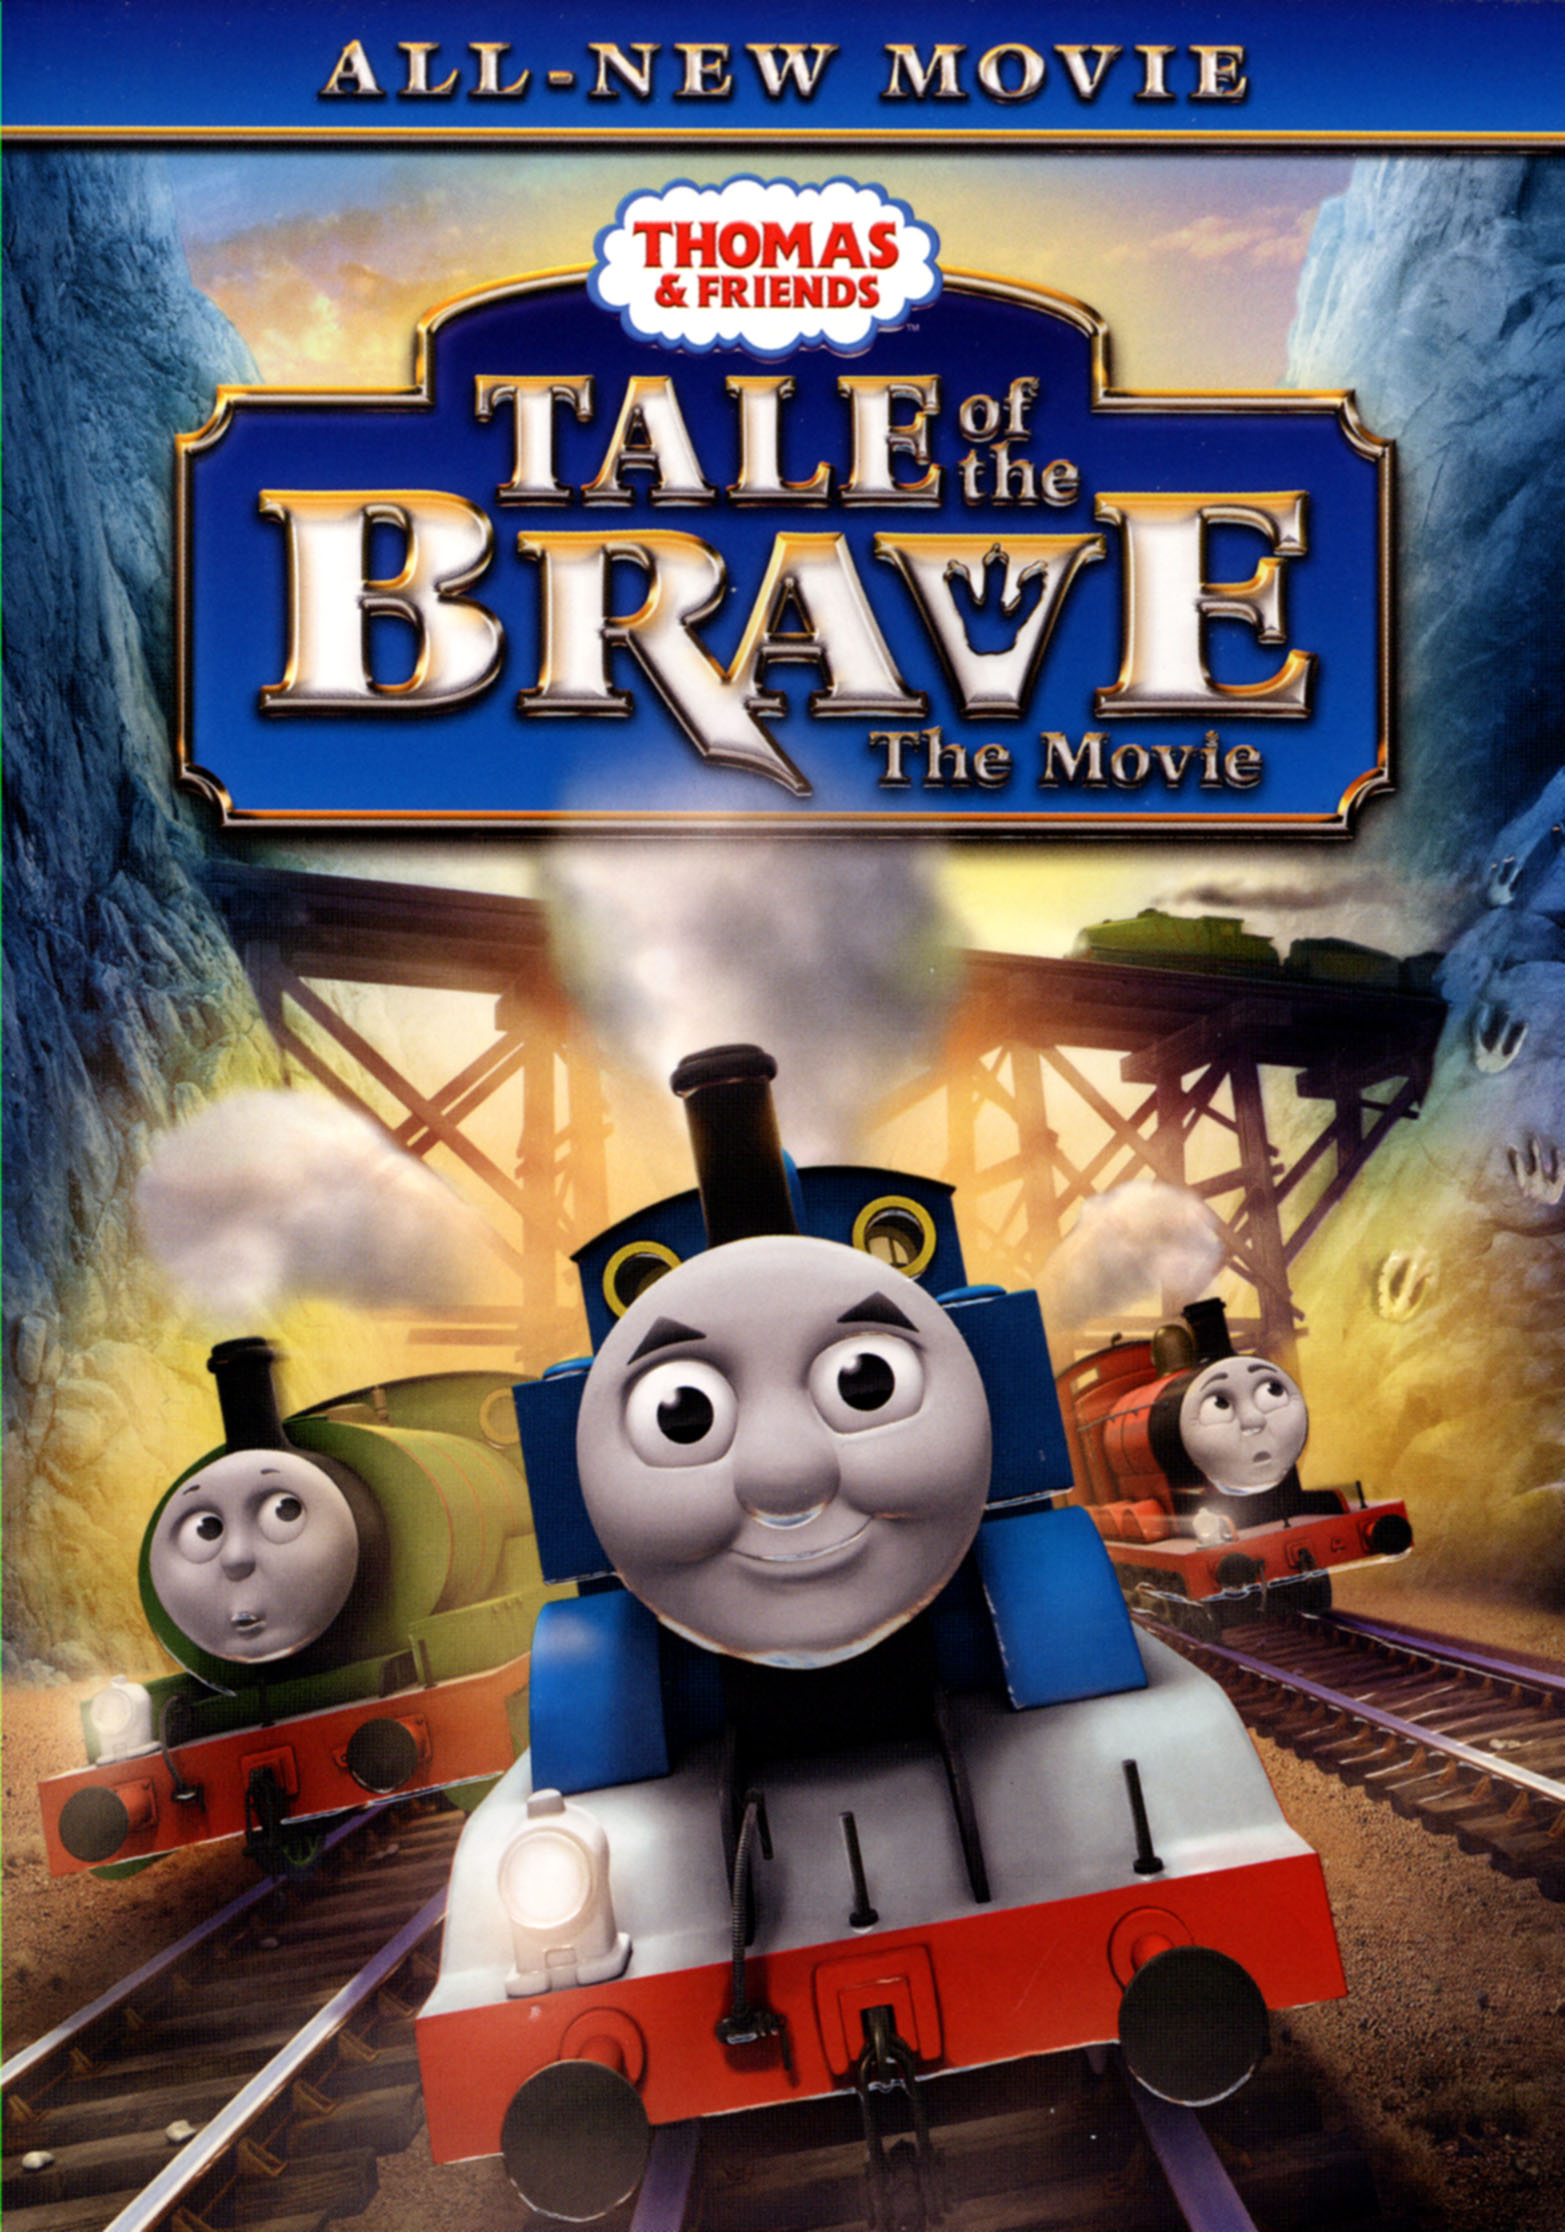 Thomas & Friends: Tale of the Brave The Movie [DVD] - Best Buy